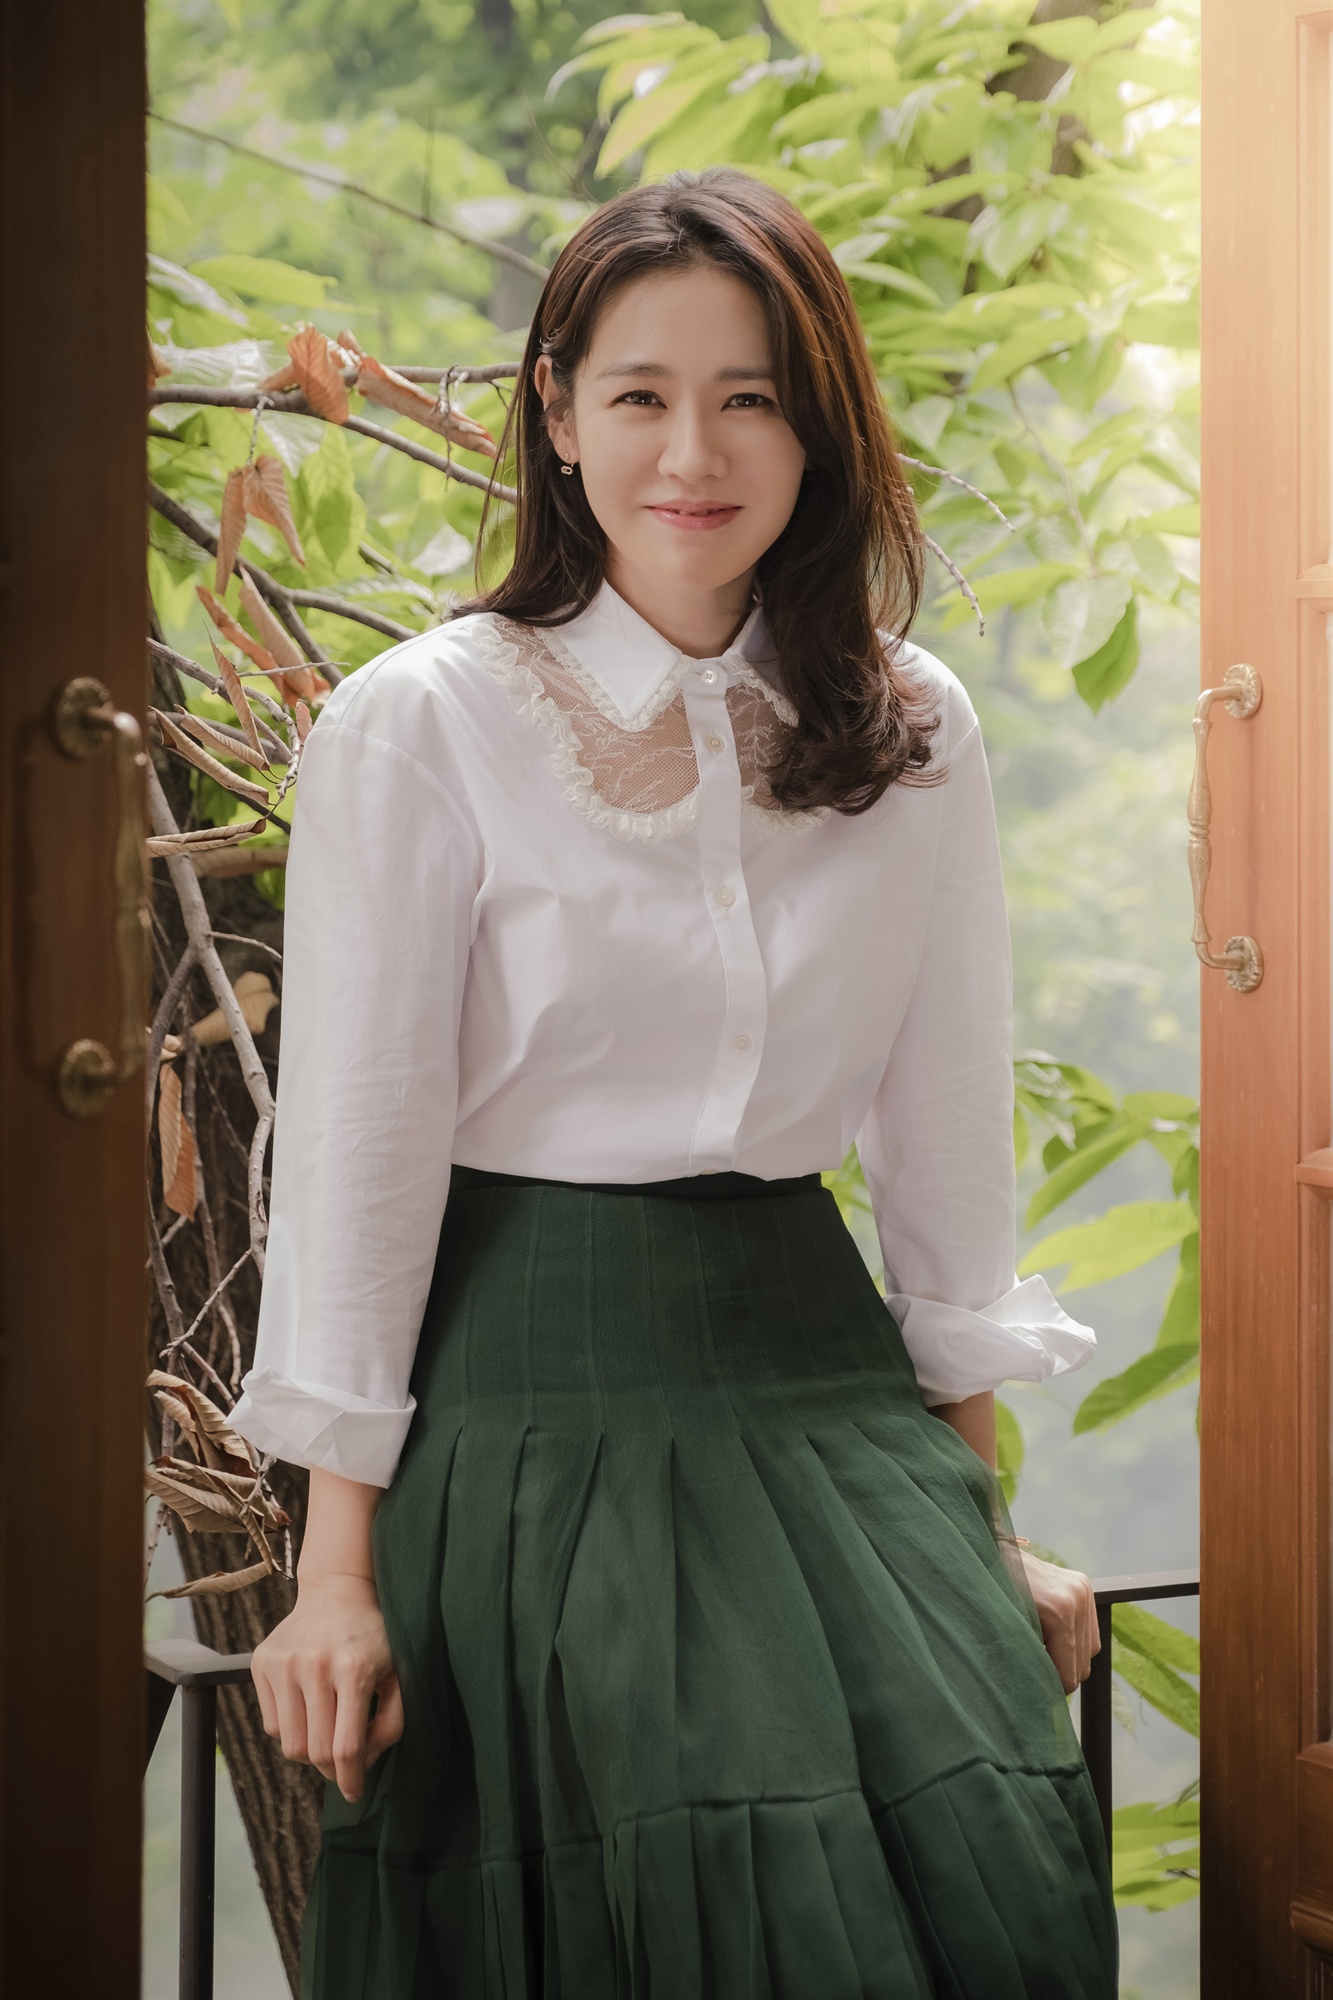 Many viewers complained when the early Jin-ah (Son Ye-jin) of JTBCs Bob-Savoury Sister and Jun-hee (Jeong Hae-in)s Pumpy and Al-Kong-dal-kong love god ended too soon.One of the biggest complaints of viewers, especially, was the frustration of the character Jin-ah.In fact, Im not quite sure what the character Jin-a is like, as the person (laughing) Son Ye-jin is not yet familiar with Son Ye-jin.Jina seems to be a good Savoie person, and Jina was the one who did not want to hurt anyone even though Jinas Choices may have hurt someone.Jina doesnt talk candidly, though she would have been more comfortable to be honest. The characters weve seen grow rapidly through pain.Thats what we want to see, but Im not sure if one person actually grows so big, living and loving.I thought it was human to repeat the same mistake. Jina is a person who has been growing for 16 parts. Maybe she came back from Jeju Island and became harder?I think (the director and the writer) wanted to talk about love ending without clearly recognizing the end of love; usually the works show more clearly.This is why it hurts, it hurts, and it finally breaks up. It is so concrete that Junhee and Jina are over without knowing when to end.When we love and break up, the day we said Lets break up isnt the day we broke up soon - the cracks are starting, and this Drama showed it well.I did not fall in love with the other person, but it felt very sick and realistic to end up doing different Choices. Jinah is real... so sad.- The reason for unrealistic was controversial because Jin-ah was kneeling. It is said that it is true to kneel down to allow love in front of parents.One of your acquaintances is a woman in her mid-thirties who said she was crying when she tried to speak out in front of her parents while she was dating against the opposition of the family.I thought it would be a good story. Jina could not shed tears. - Eventually, many viewers expressed regret at the end of the resignation. Yes. The reality is so. I was so sad to hear that story.Legally, it takes years for the workplace and Victims to fight, and in the meantime Victims often collapses.The director said, Jinah lasted for this time. It is hard to tell how painful the moment Jina went to resign was.- There is a change in Son Ye-jin as he Acts the character Yoon Jin-ah. The visibility has become wider.The character in the drama throws the ambassador, but I want to let the viewers know that there are various situations, not just the ambassador, and I want to express it as an actor.But Jina had many points that she could not express, and there were situations where she could not talk about it, and she seemed to have had a new experience when she met Jina. - Son Ye-jin seems to be having similar troubles with Jin-ah when he looks at Jin-ah. What do you think when Son Ye-jin looks at Jin-ah?Im a lot of Savoie honest, so even if your opponent is hurt, Im honest. Honestness may be selfish, but it can be an advantage.On the other hand, Jina is a swallower, so it is not until 16 times that Junhee tells his story, Do you know how I lived?There were moments when that was salty and in some ways I wanted to do these Choices too.- Son Ye-jin said that he was honest, and Jin-a said he swallowed. But did Jin-ah take the hand of Jun-hee under the table first?The scene was an improvisational ad-lib: Savoie is rare when a director gives specific instructions on the spot; the action line is tailored naturally according to the circumstances.I didnt think of it at home, and when I came to the scene, I grabbed my hand and drank bottled beer. I dont think Id actually be able to Oh! What if the other person shakes it off.Acting is risking his life.- Director Ahn Pan-seok once compared Son Ye-jins Acting to Muhammad Ali, saying that the scene coming to the filming scene to act is like a boxer on the ring. (laughing) actors will have different ways of mind control, each one of them might say, Where is that? but I sometimes want to say, Am I too spooky?Its funny and amazing when you talk about it. When I take an important god, I wash my hands in the bathroom and think about it.I feel what it will be like to disinfect my hands before the surgeons do the surgery, and when I wash my hands and go to the scene soon, I have to take the god.No one helps me on the spot. I have to fight alone, thoroughly and alone. I was always surprised that the coach had said it.When Im on Acting, I feel like Im risking my life in a way, this is all I really am, so I try hard, it happens: Lets work hard!Its not, its making you work hard.- The first criterion for Choicesing scenario is also new? Yes. I did not try.Even if it is the same genre, I want to continue to do stories that I have not done, characters that I have not dealt with. - Son Ye-jin has a equation called Meloquin. What do you think of it? I think Ive done melodies for a long time.The orthodox melodrama, which was the first time since the Eraser in My Head, had been more than a decade and had recently been the melodrama of Shark, but Shark was a Drama that showed more different things (than Melo).I felt like I had taken a melodrama for a long time, and then I did this drama. Later, I would like to shoot movies like The Bridge of Madison County and Hwa Yang Yeonhwa.Acting risked his life... and no ones helping me.